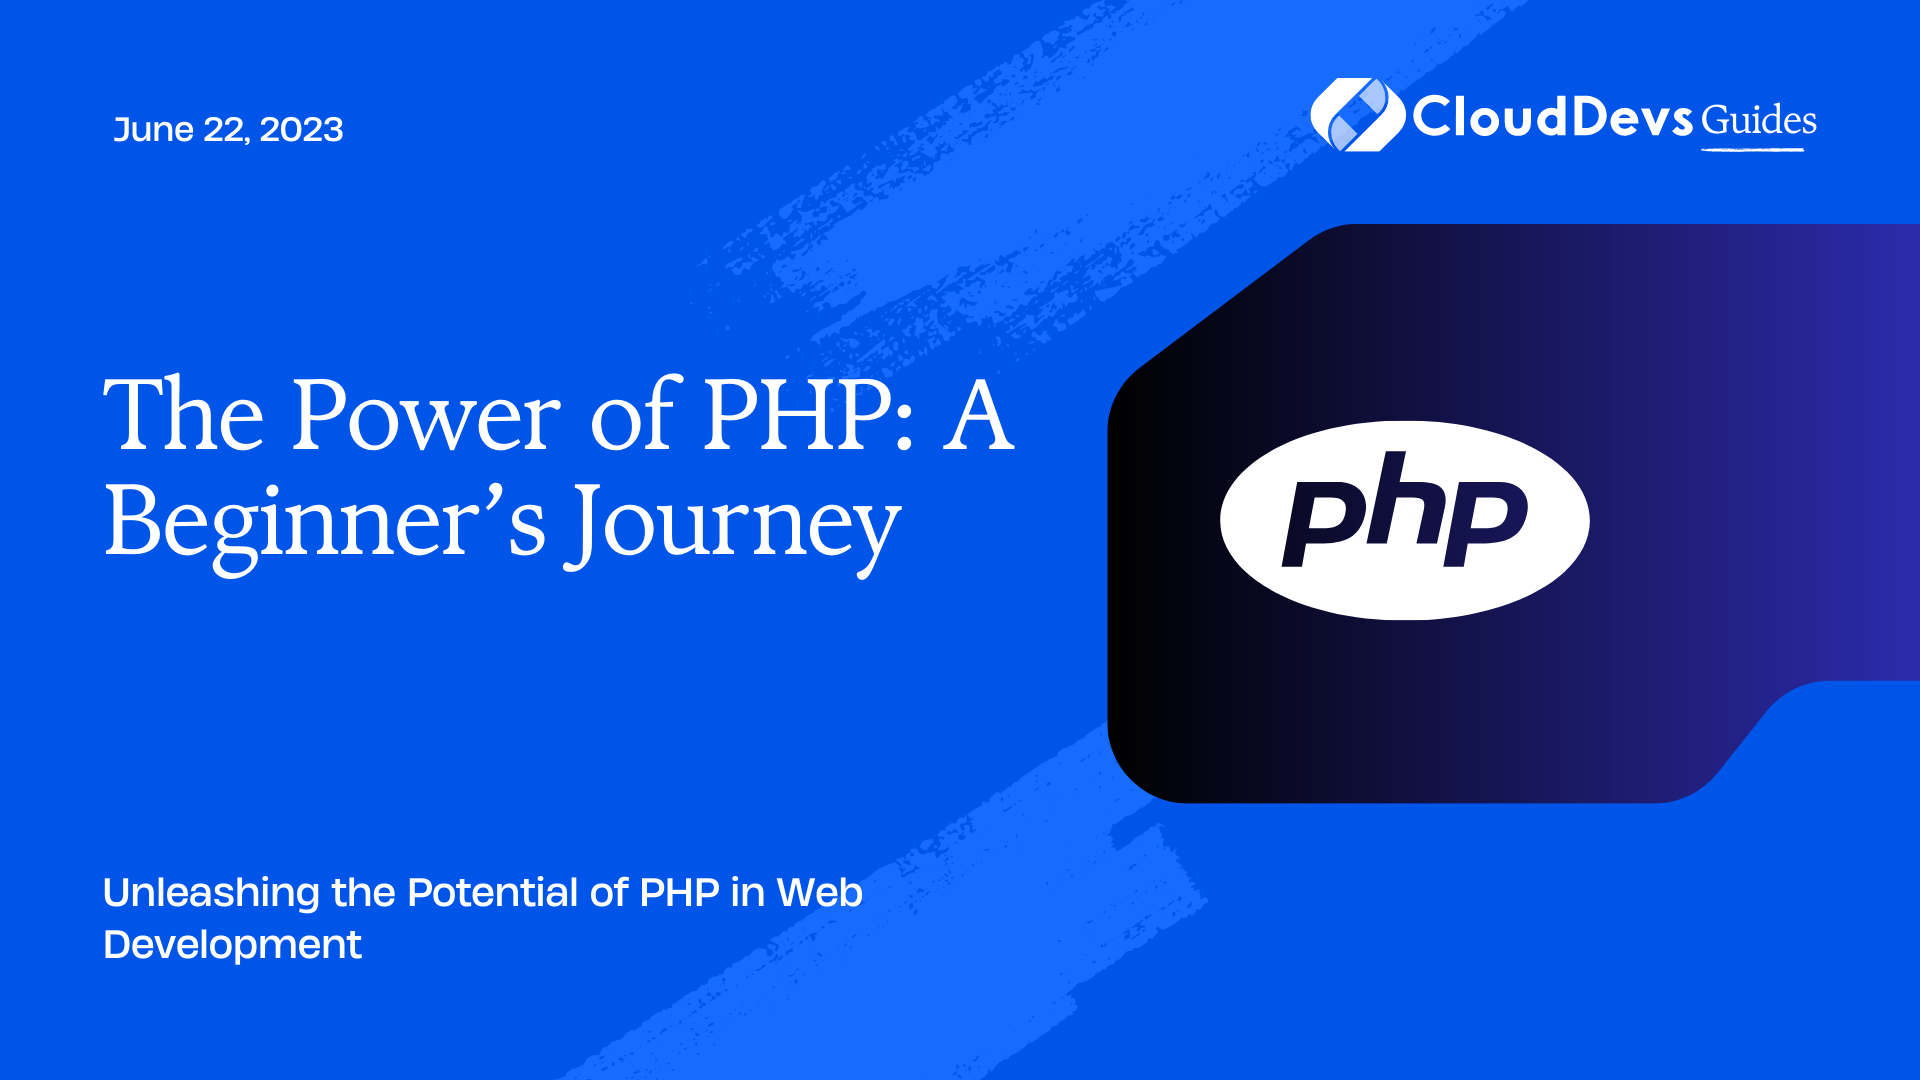 The Power of PHP: A Beginner’s Journey